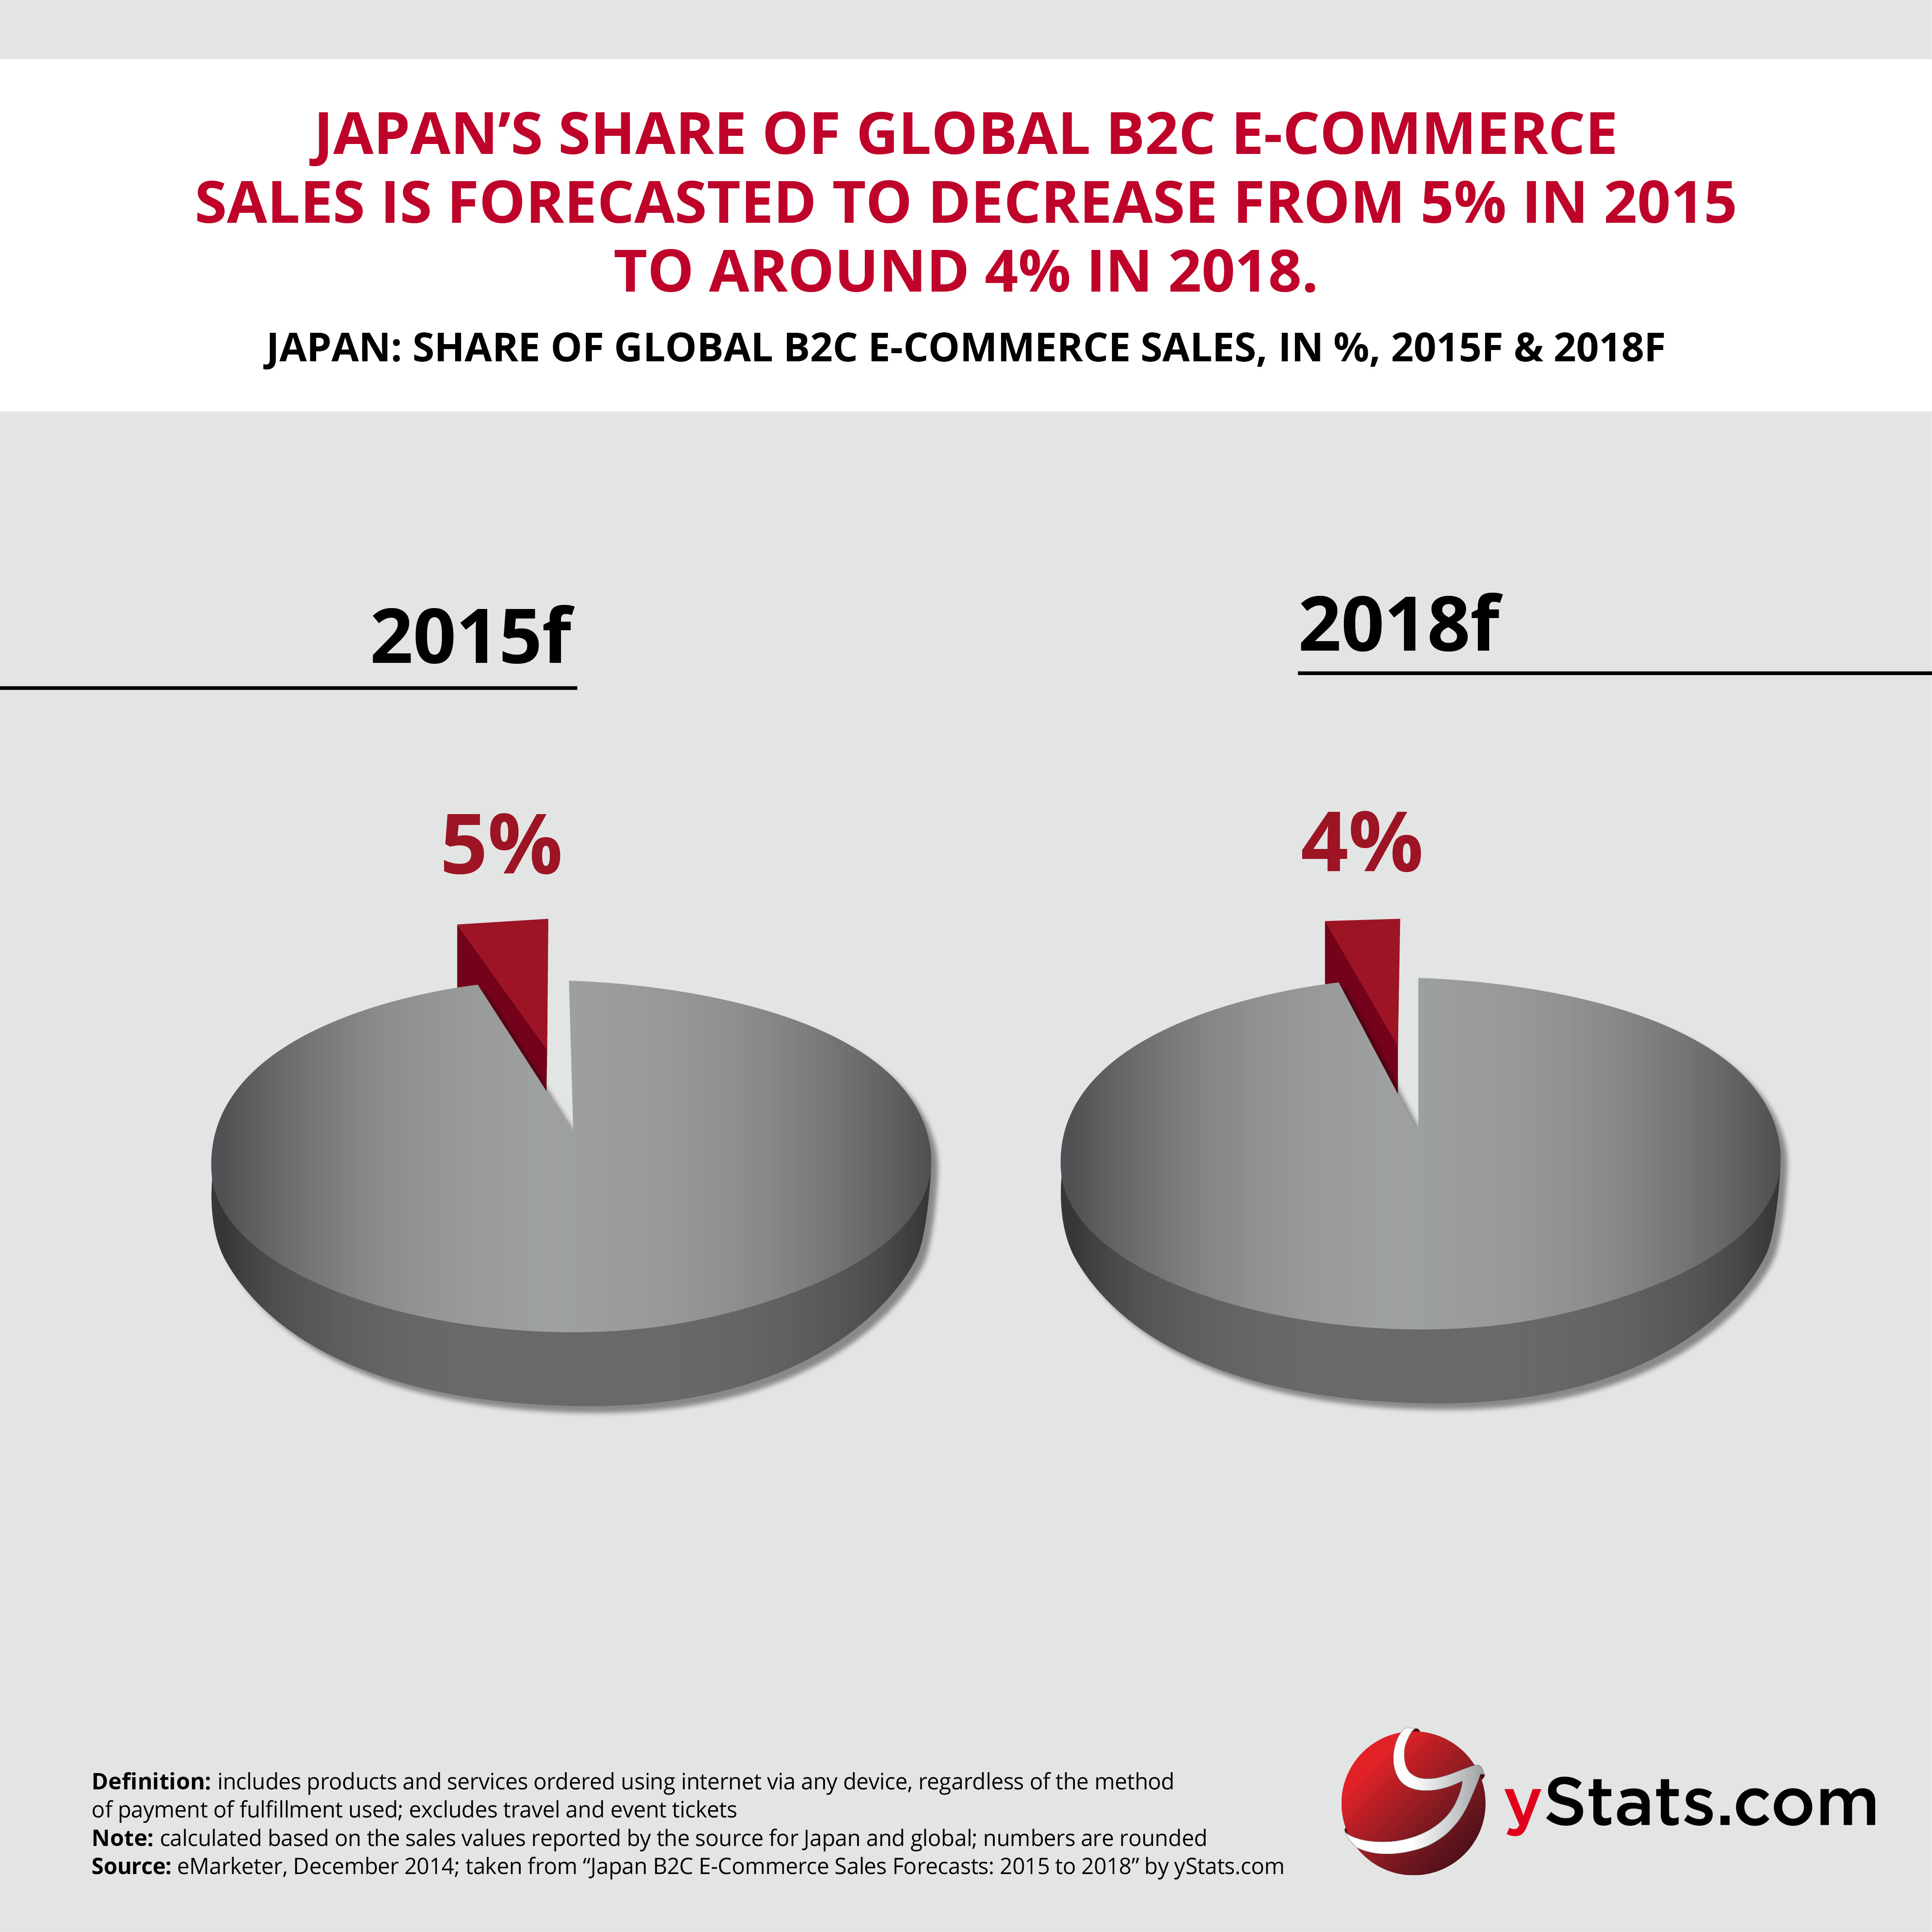 Infographic_ Japan B2C E-Commerce Sales Forecasts 2015 to 2018 by yStats.com